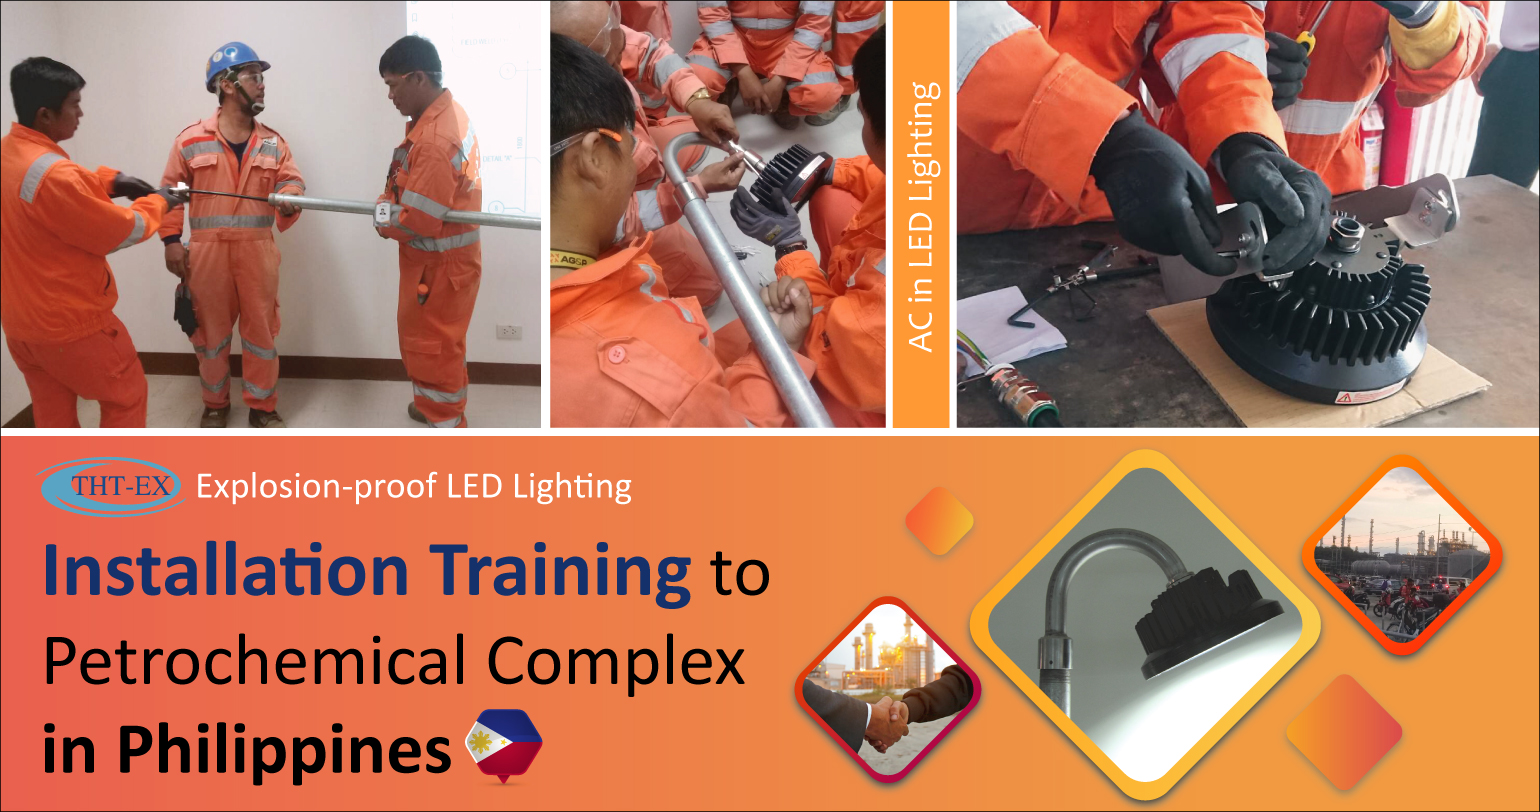 Explosion proof LED Lighting Installation Training in Petrochemical Complex